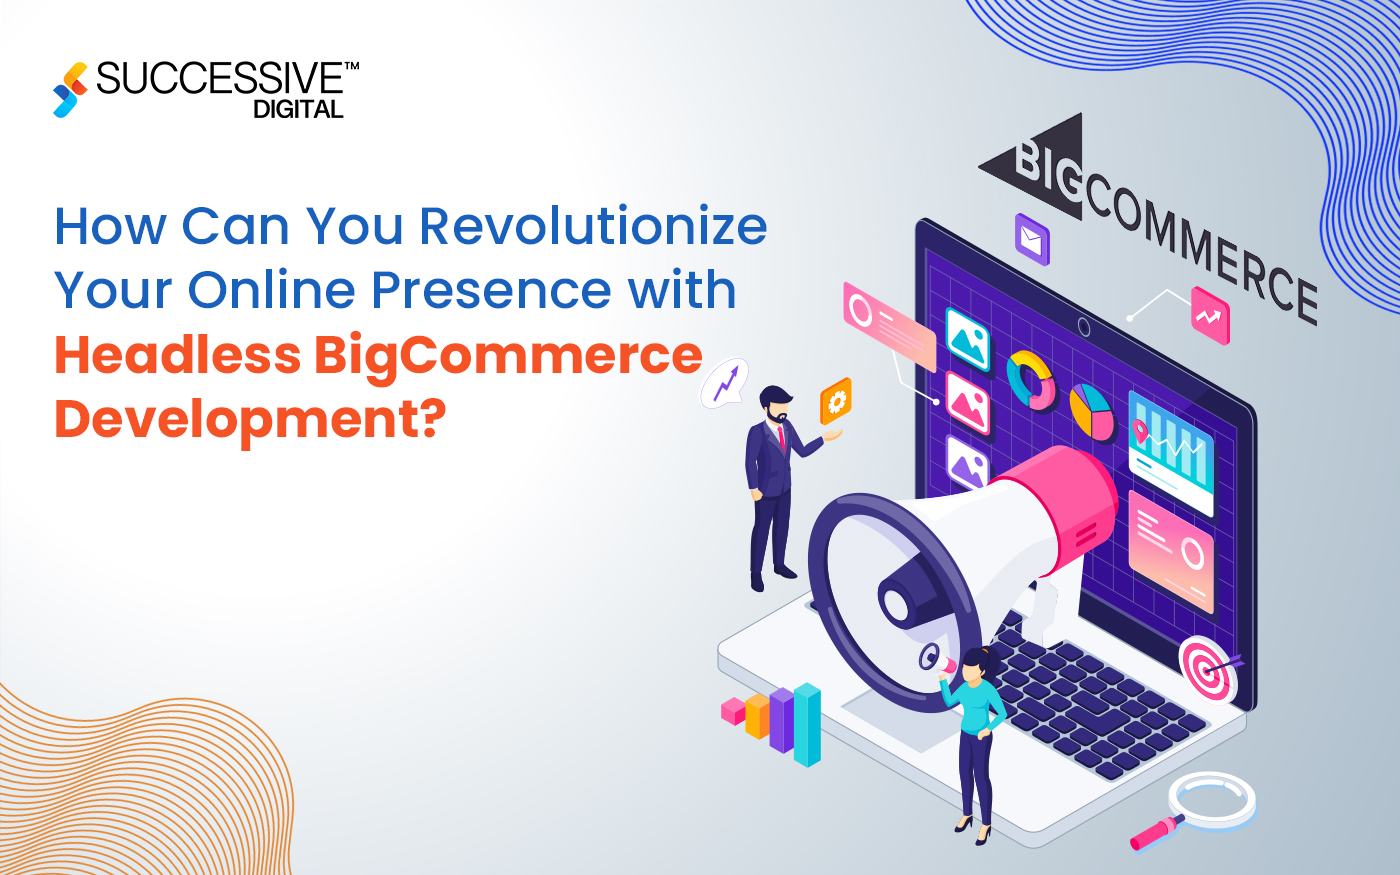 How Can You Revolutionize Your Online Presence with Headless BigCommerce Development?